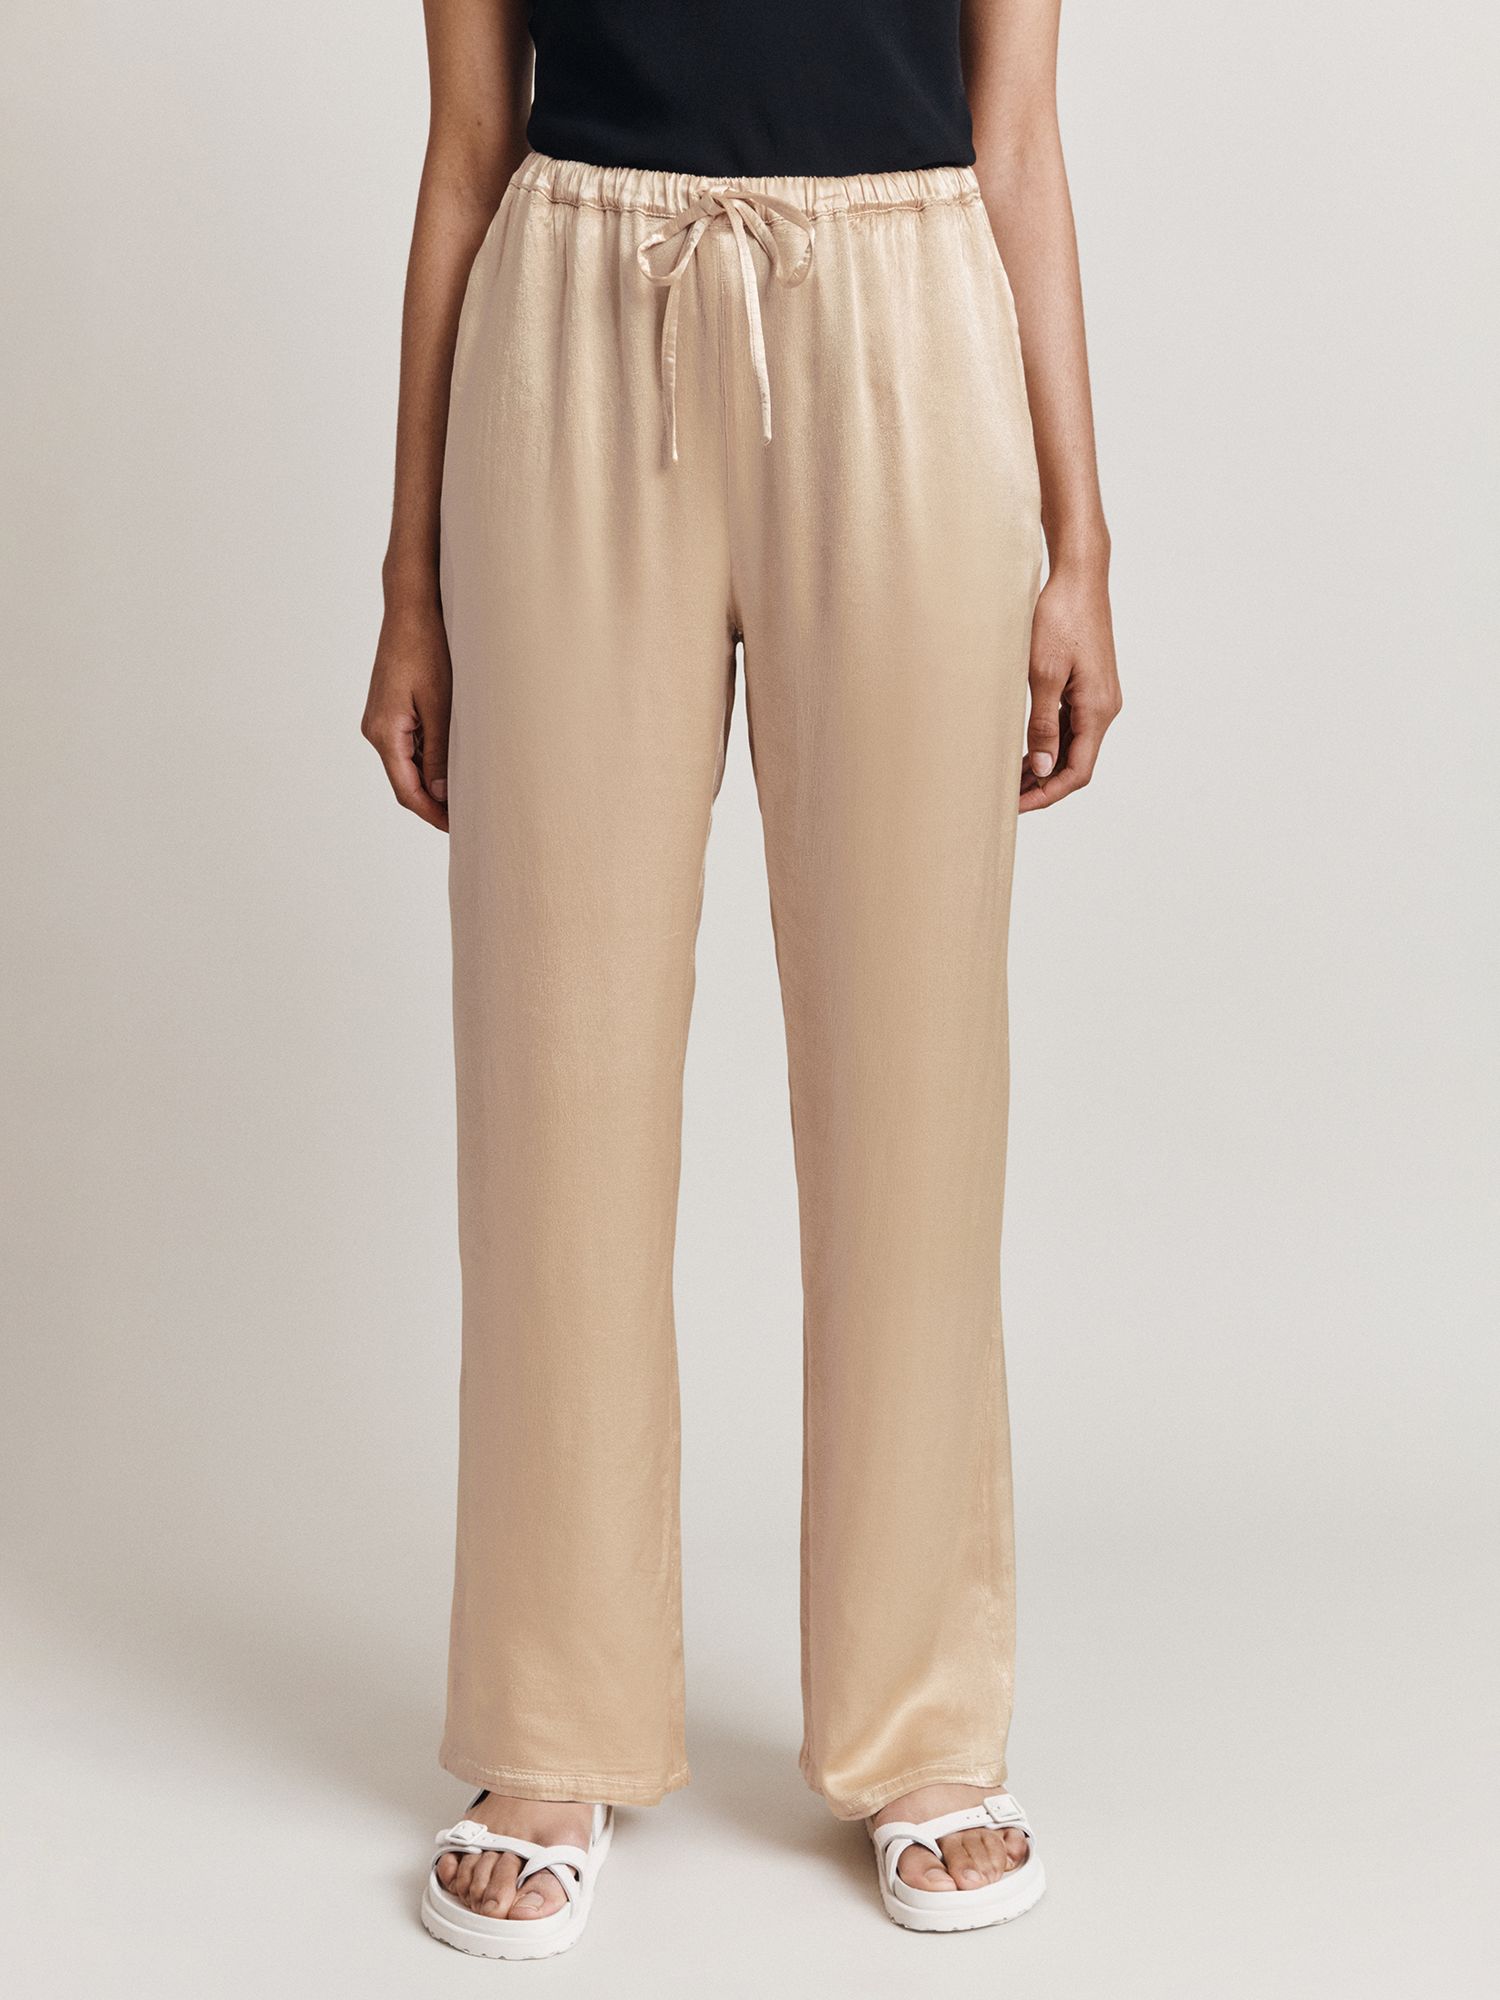 French Connection Trousers for Women - Poshmark